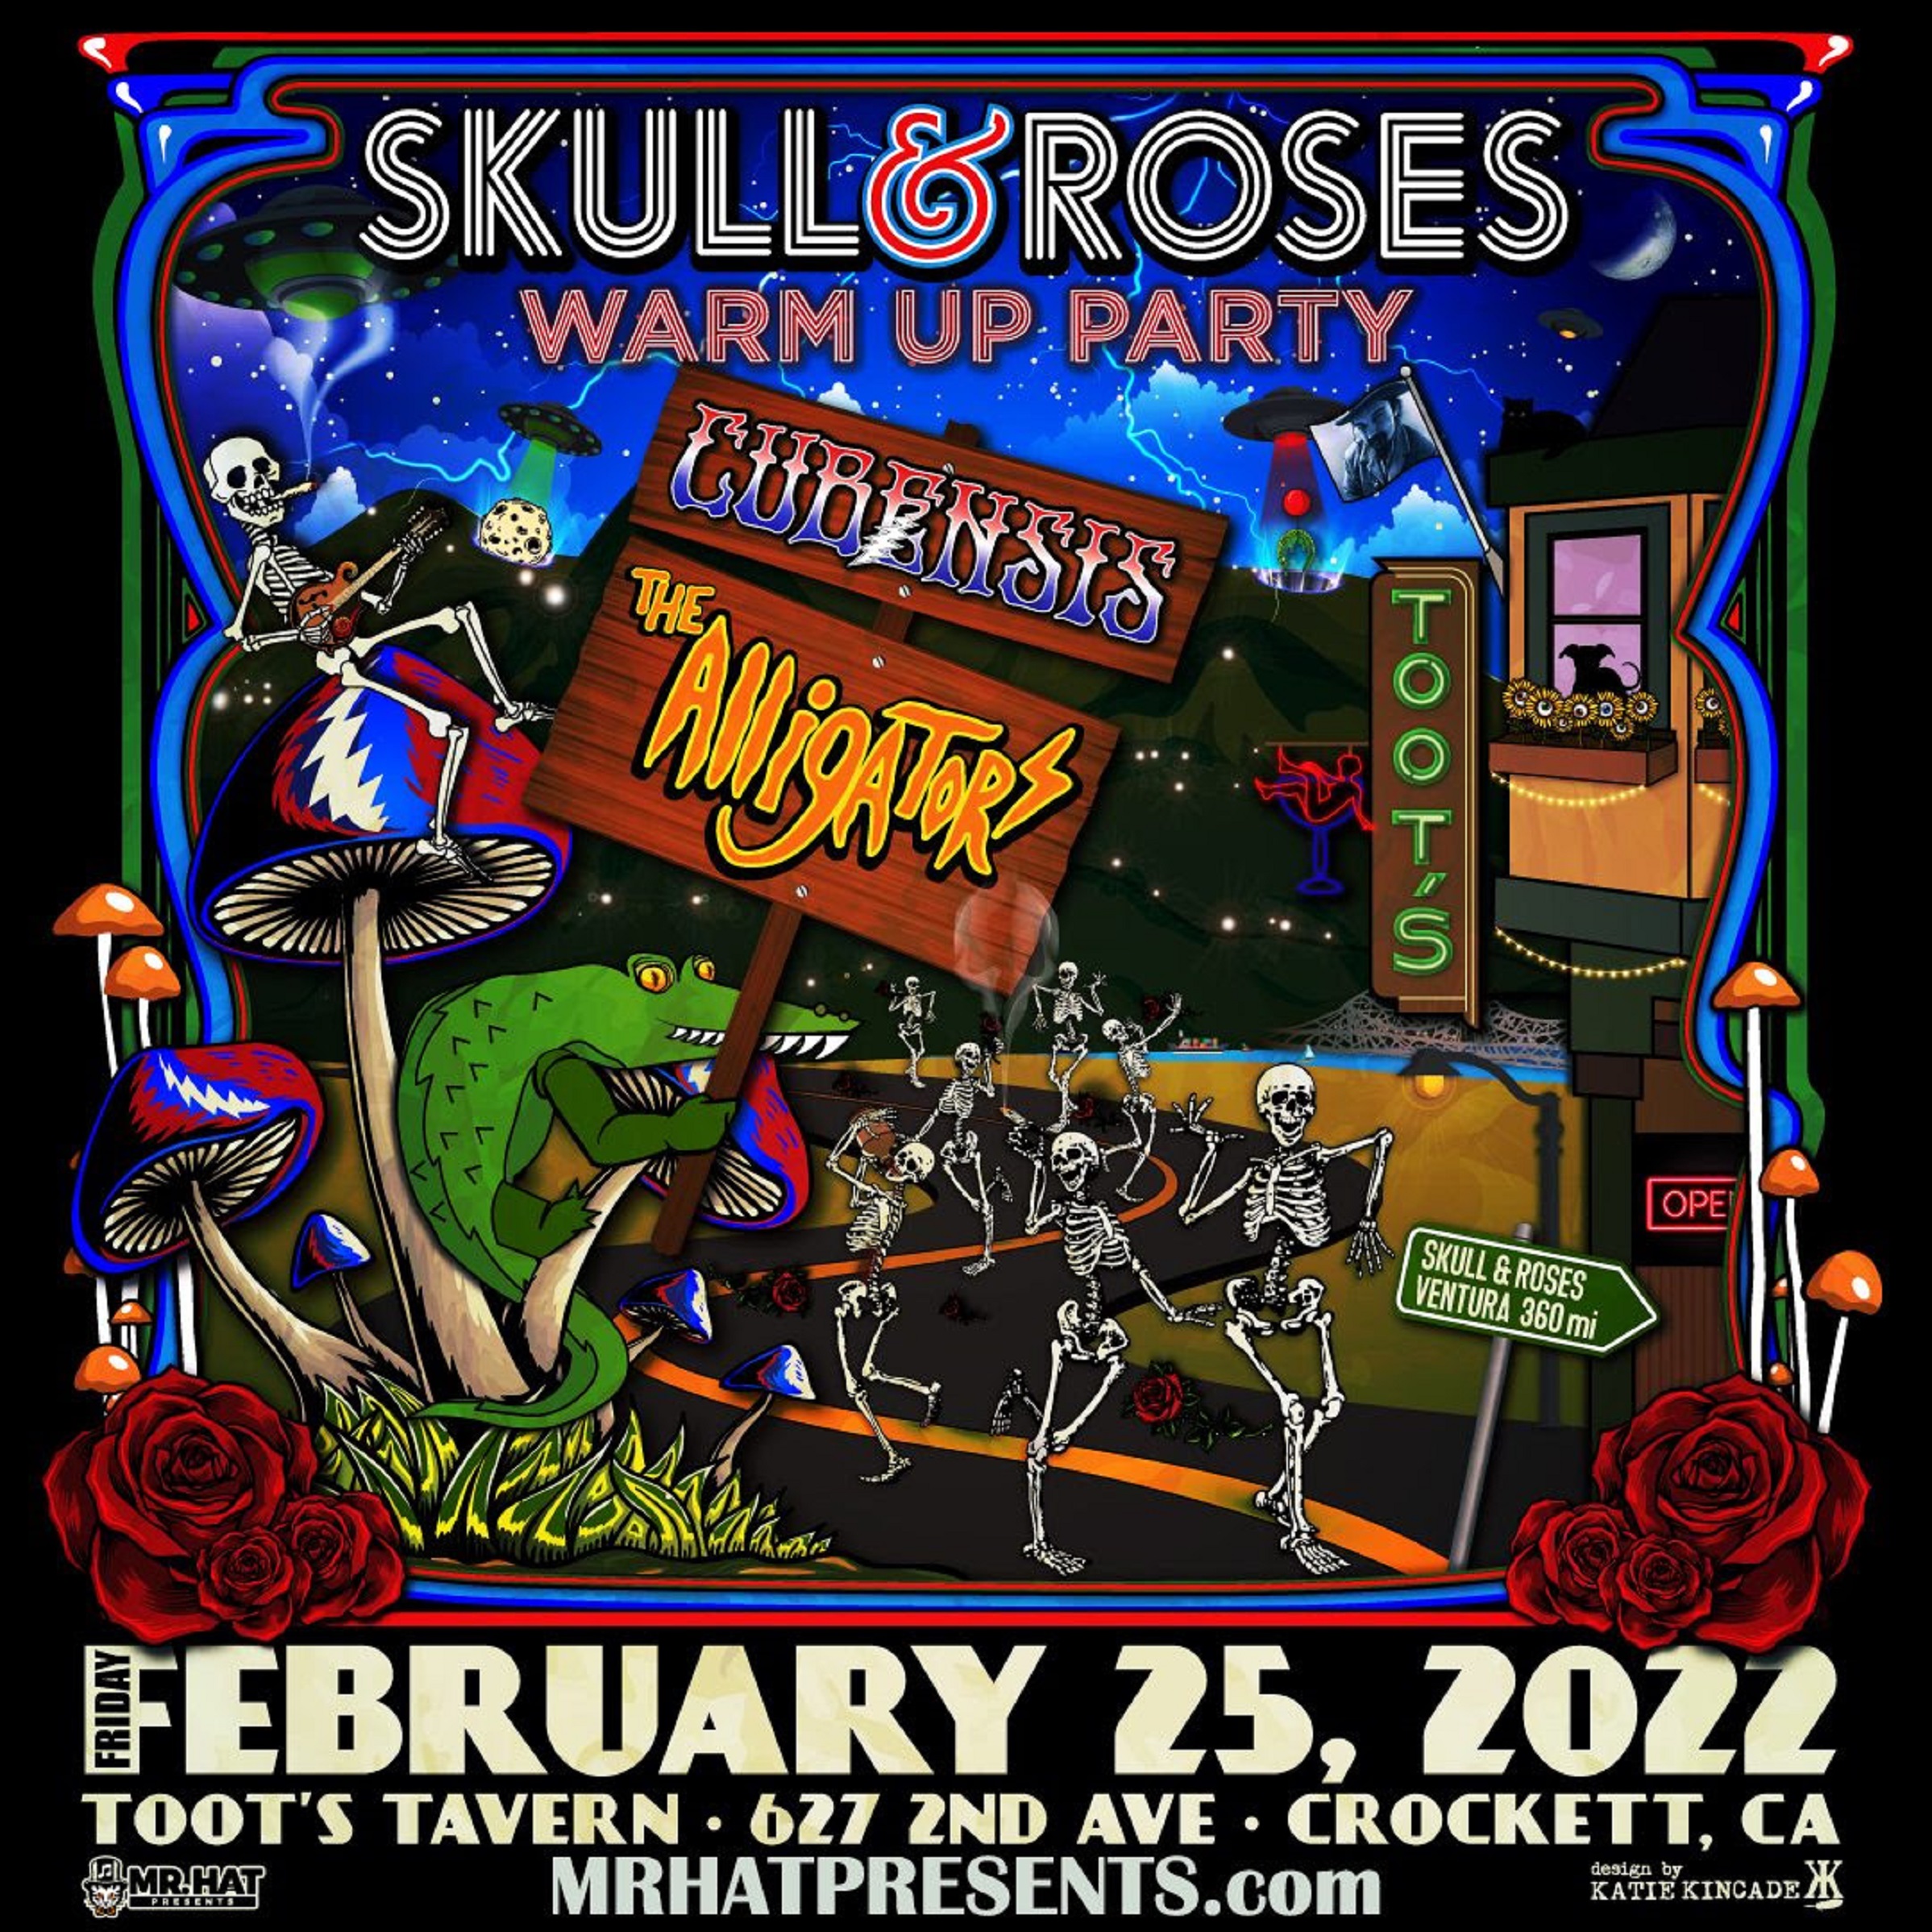 Announcing The Skull & Roses Warm Up Party Feb 25th at Toot’s Tavern